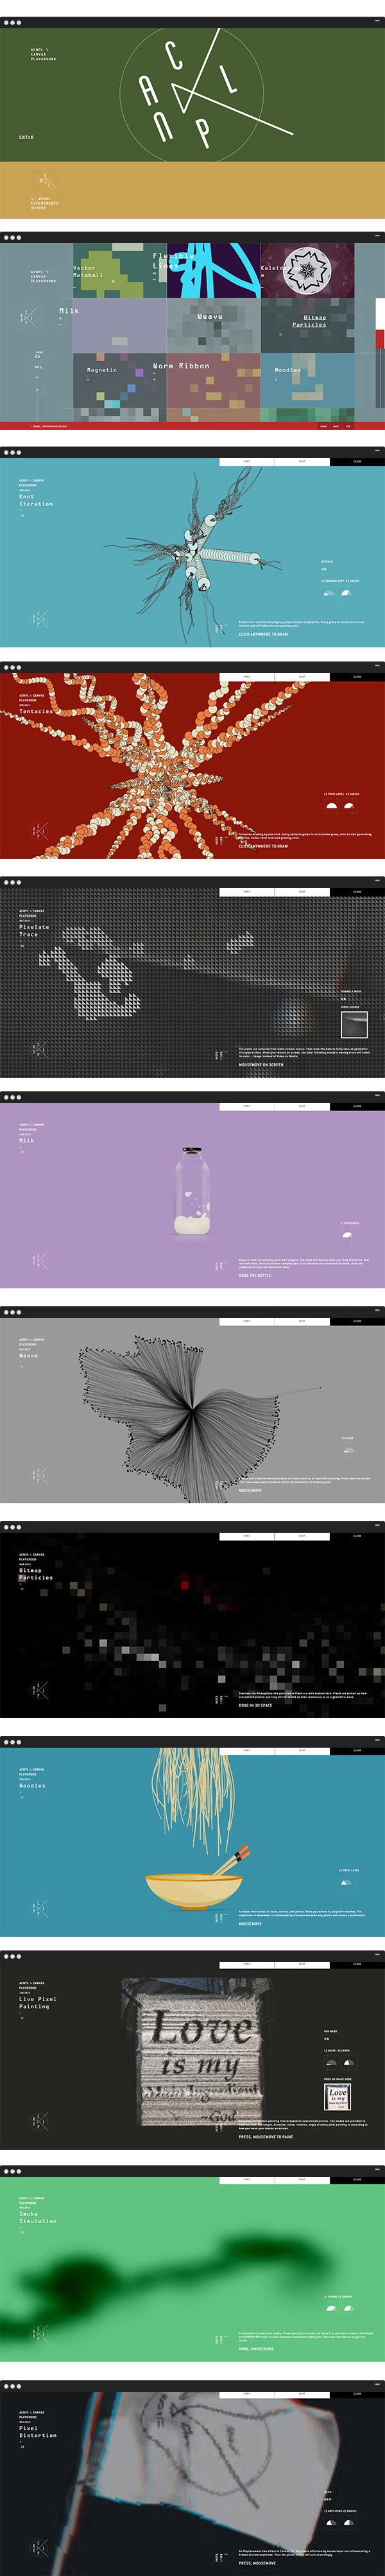 interactive html5 real-time graphic experiments animations fullscreen colorful